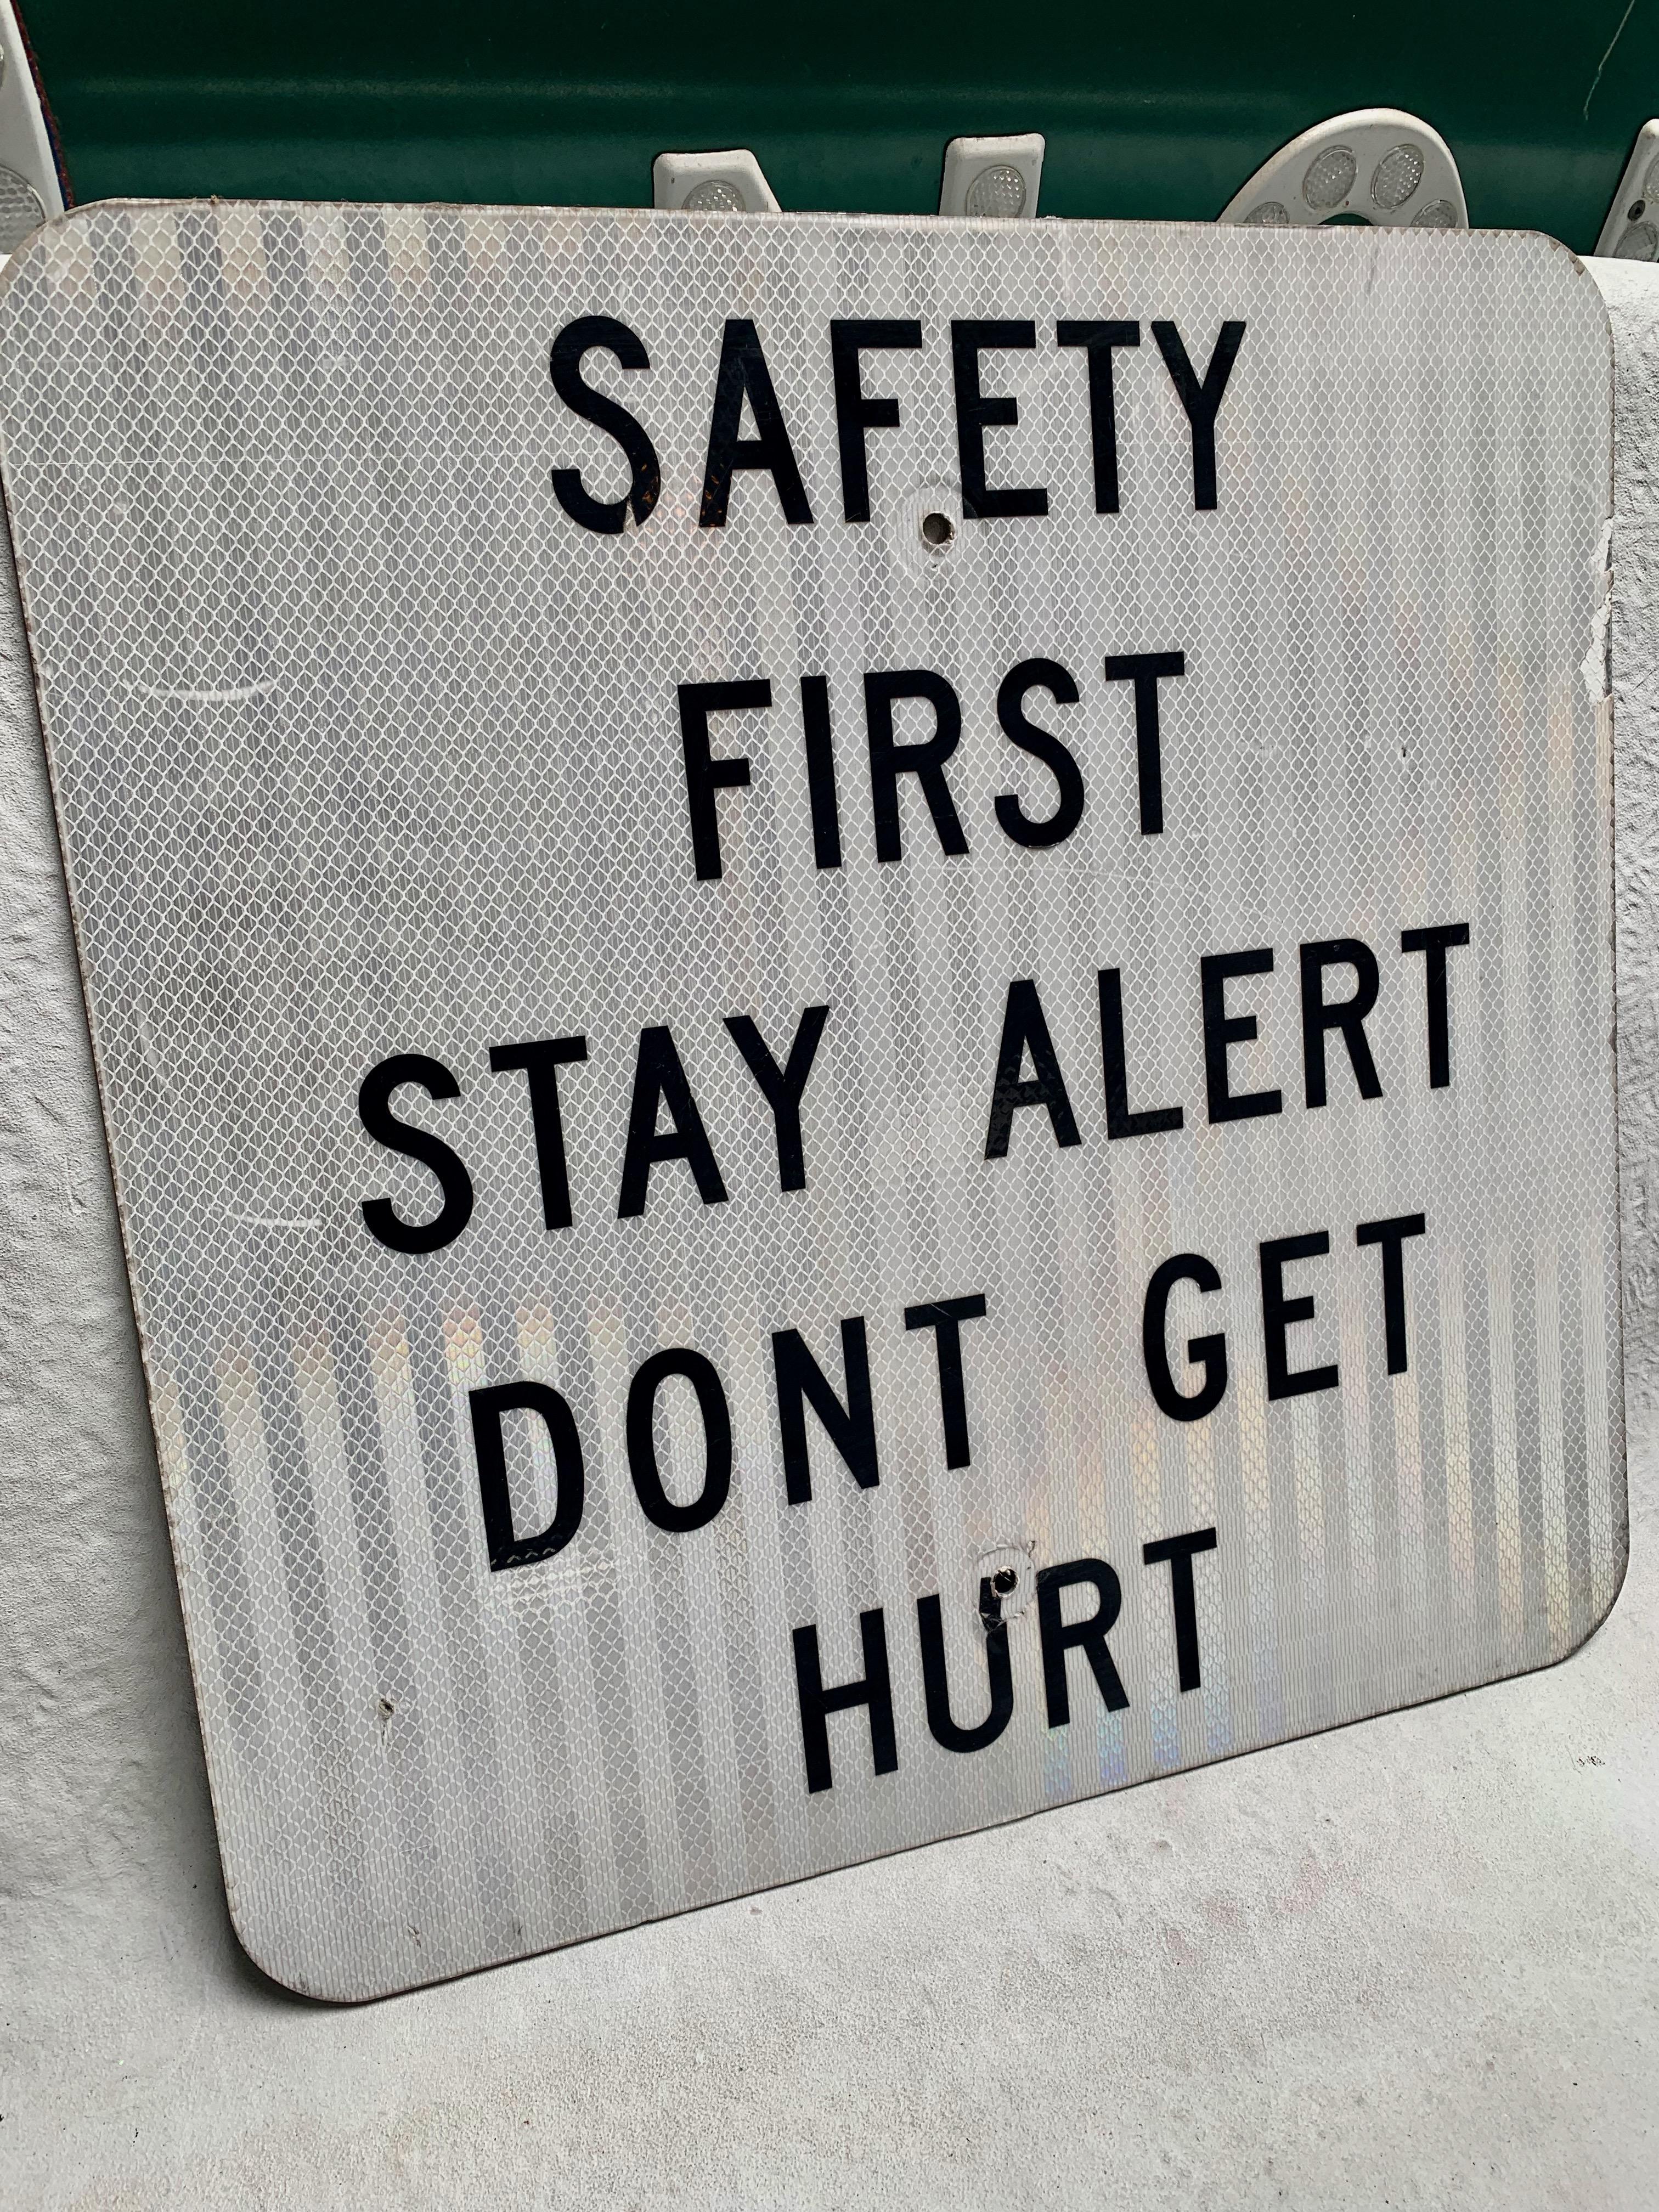 Interesting vintage highway sign. Safety First, Stay Alert, Don't Get Hurt. White reflective steel sign with black lettering. Great graphics. Super unusual sign.